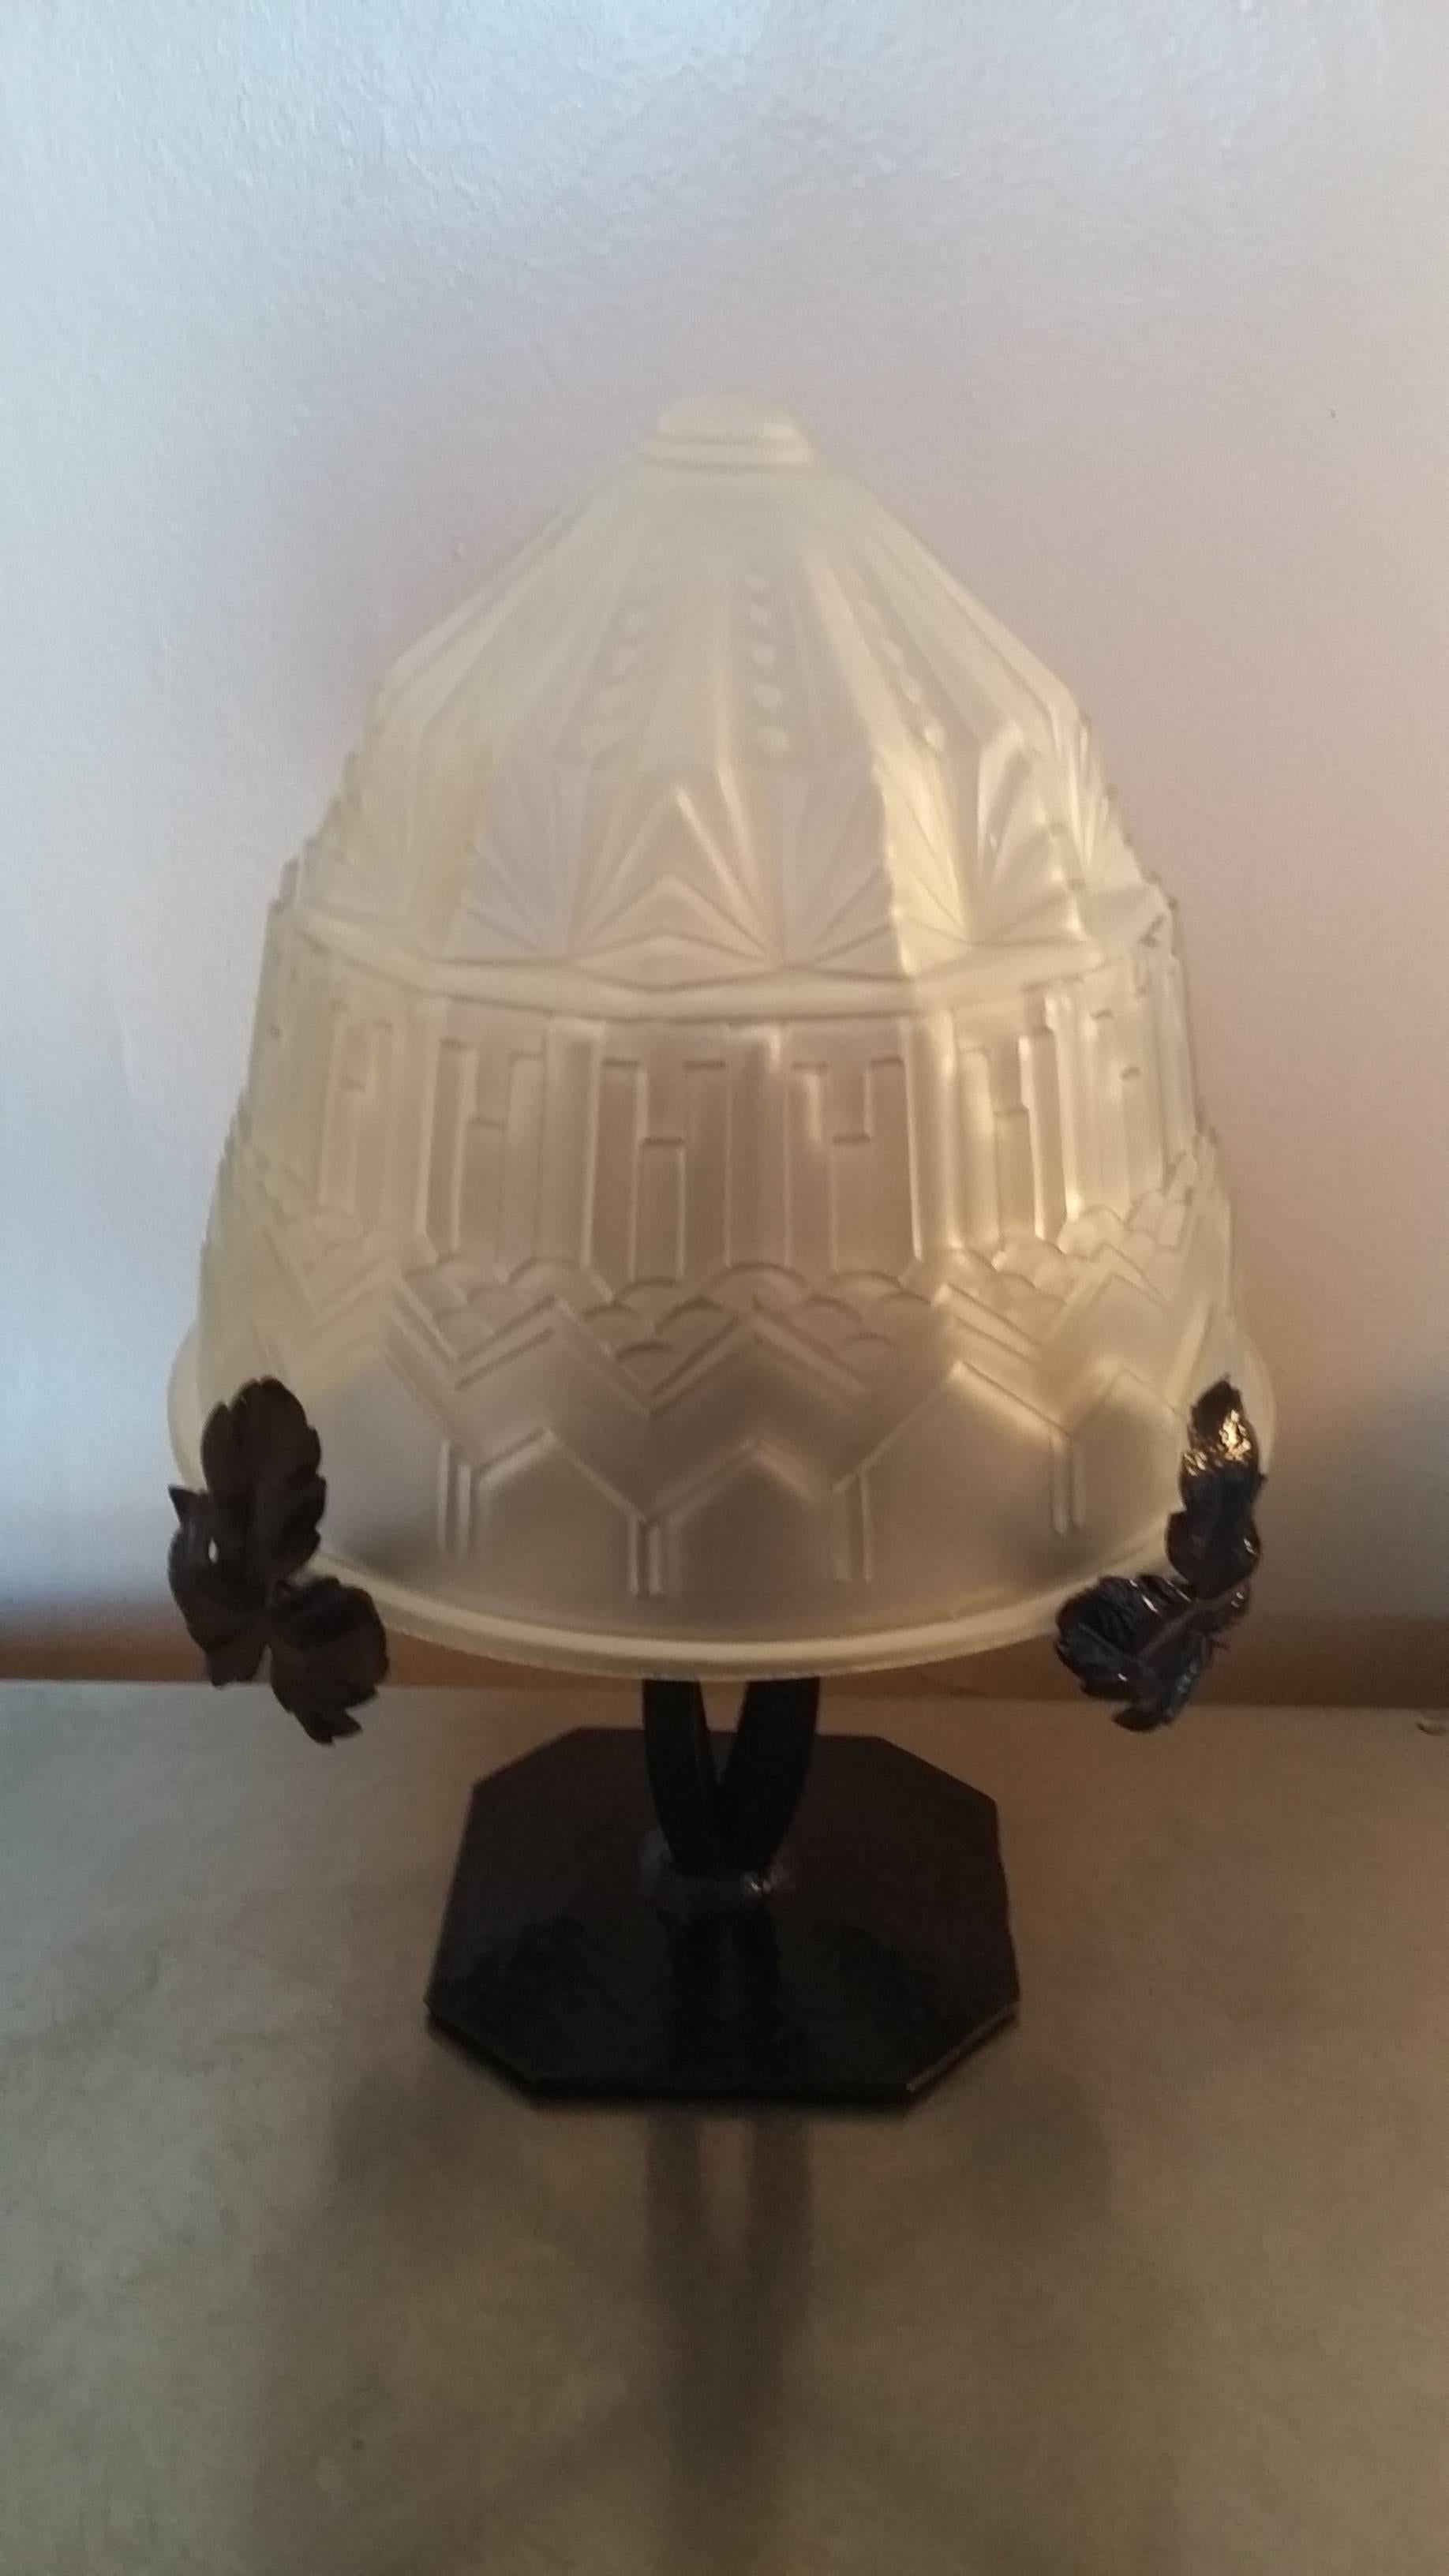 Art Deco table lamp in blackened and hammered wrought iron. A gorgeous molded glass paste with geometric lines seats on four arms decorated with vine leaves.
France, 1930s
In an excellent general condition, working perfectly, the electric part has